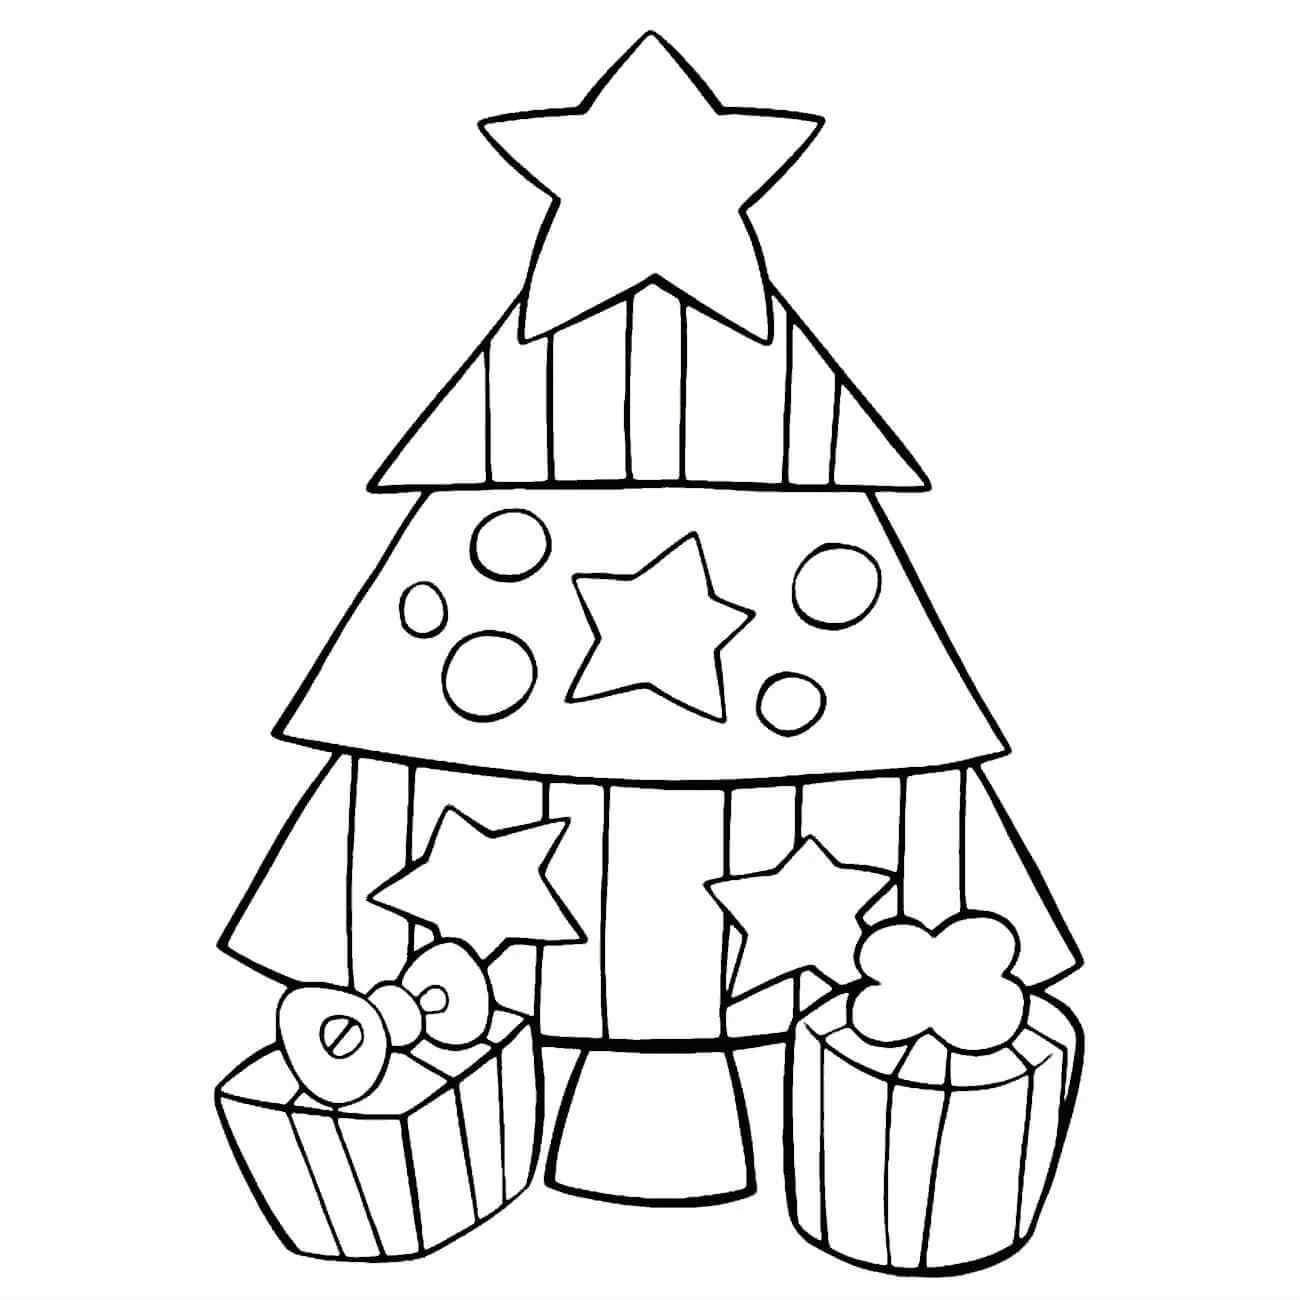 Christmas Tree With Gifts Next To It Coloring Page